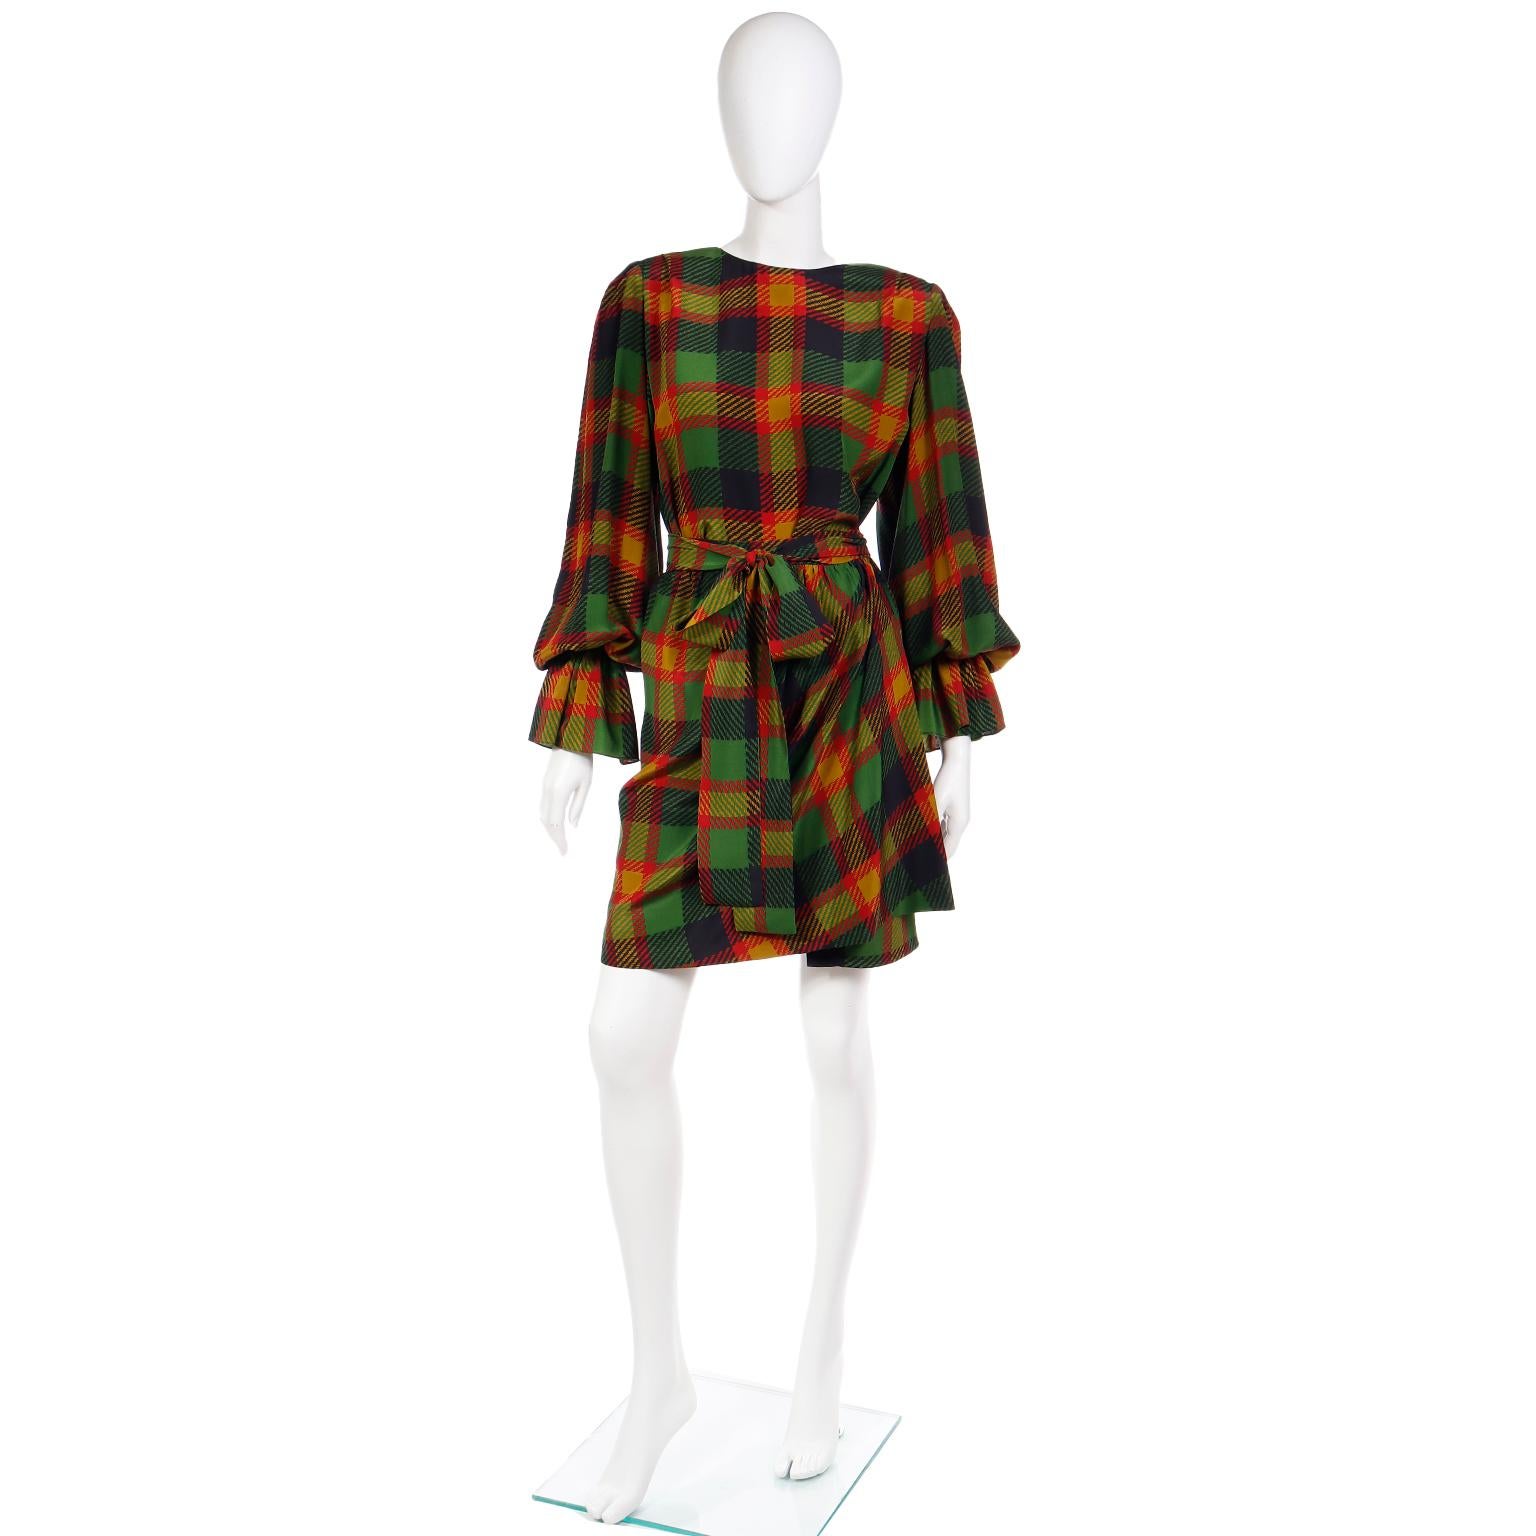 1990 Yves Saint Laurent Green & Orange Plaid Silk 2 pc Dress w Poet Sleeves In Excellent Condition For Sale In Portland, OR